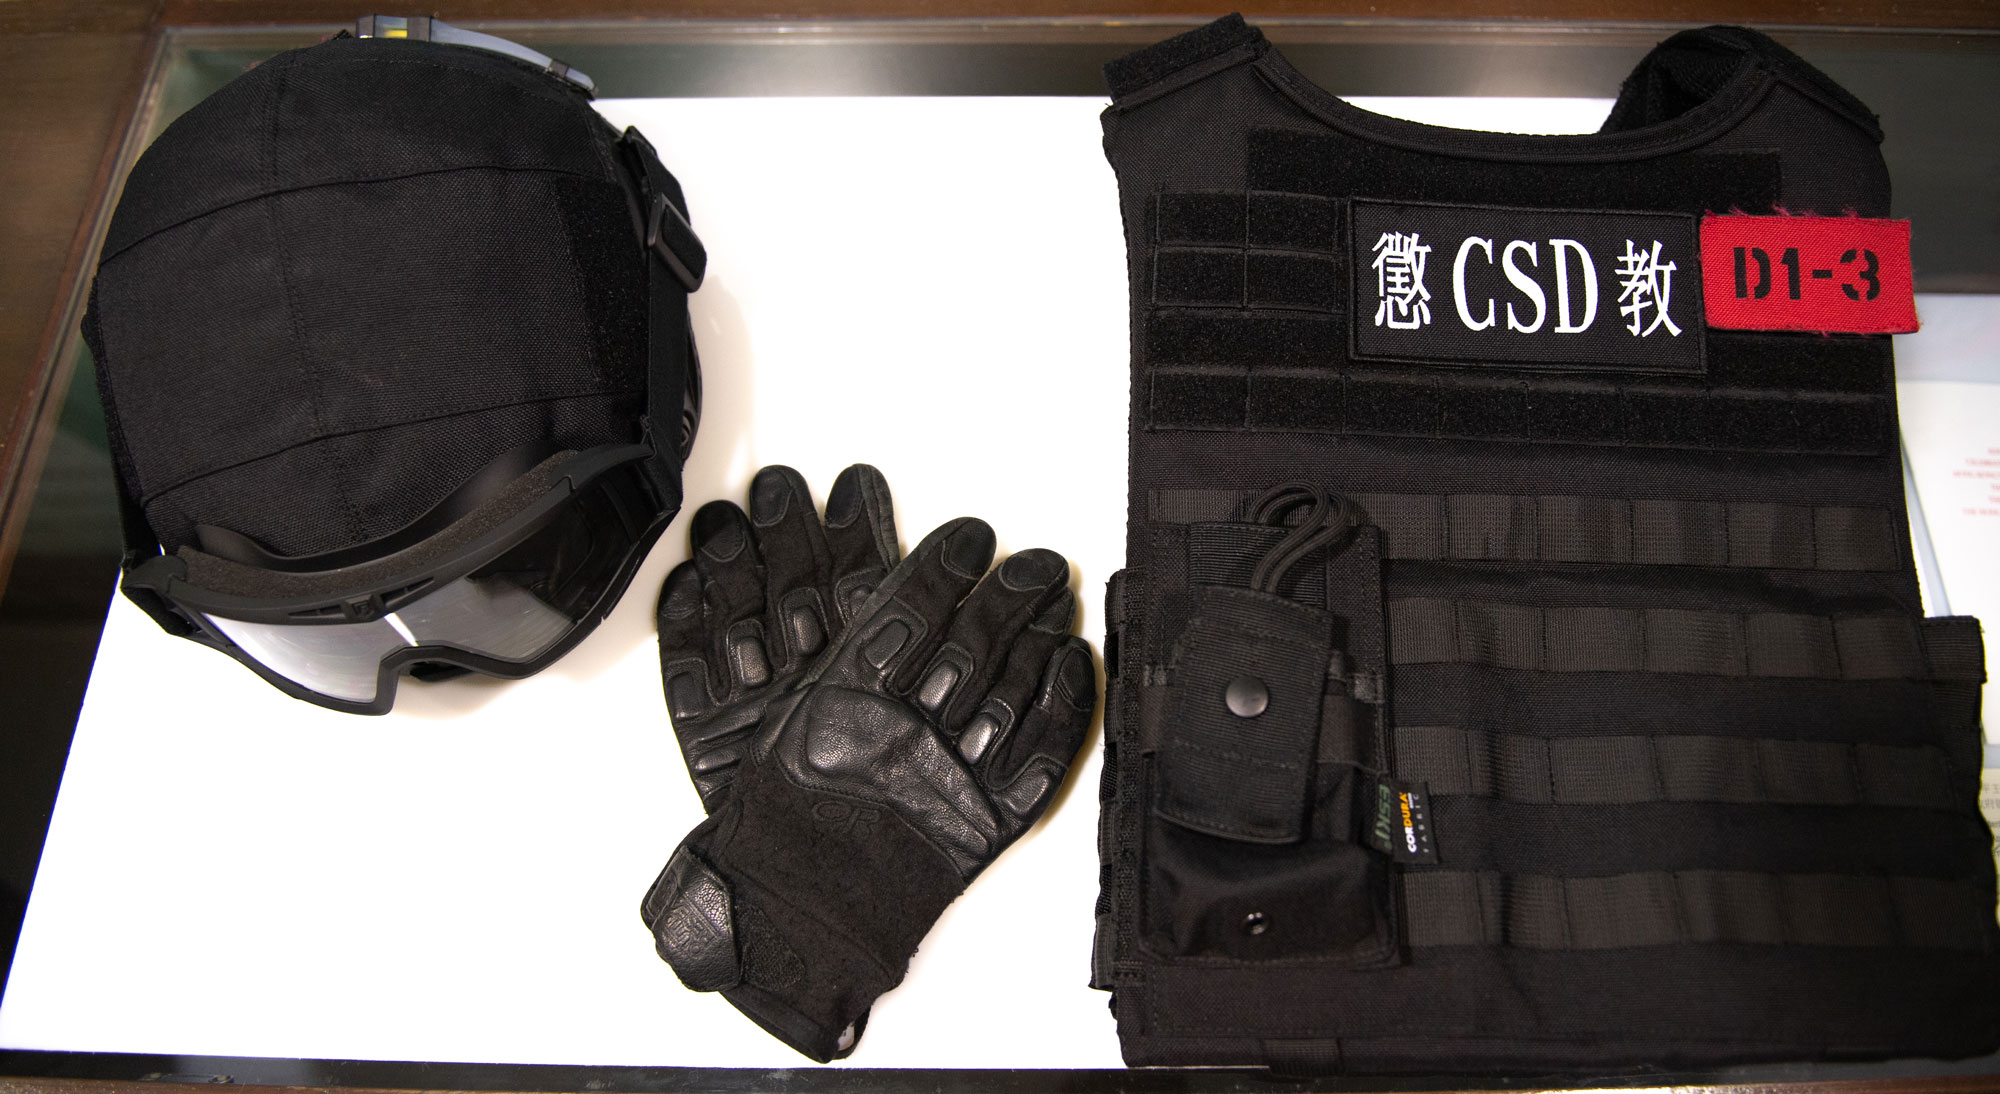 Equipment of Special Constables wore by a Correctional Officer.